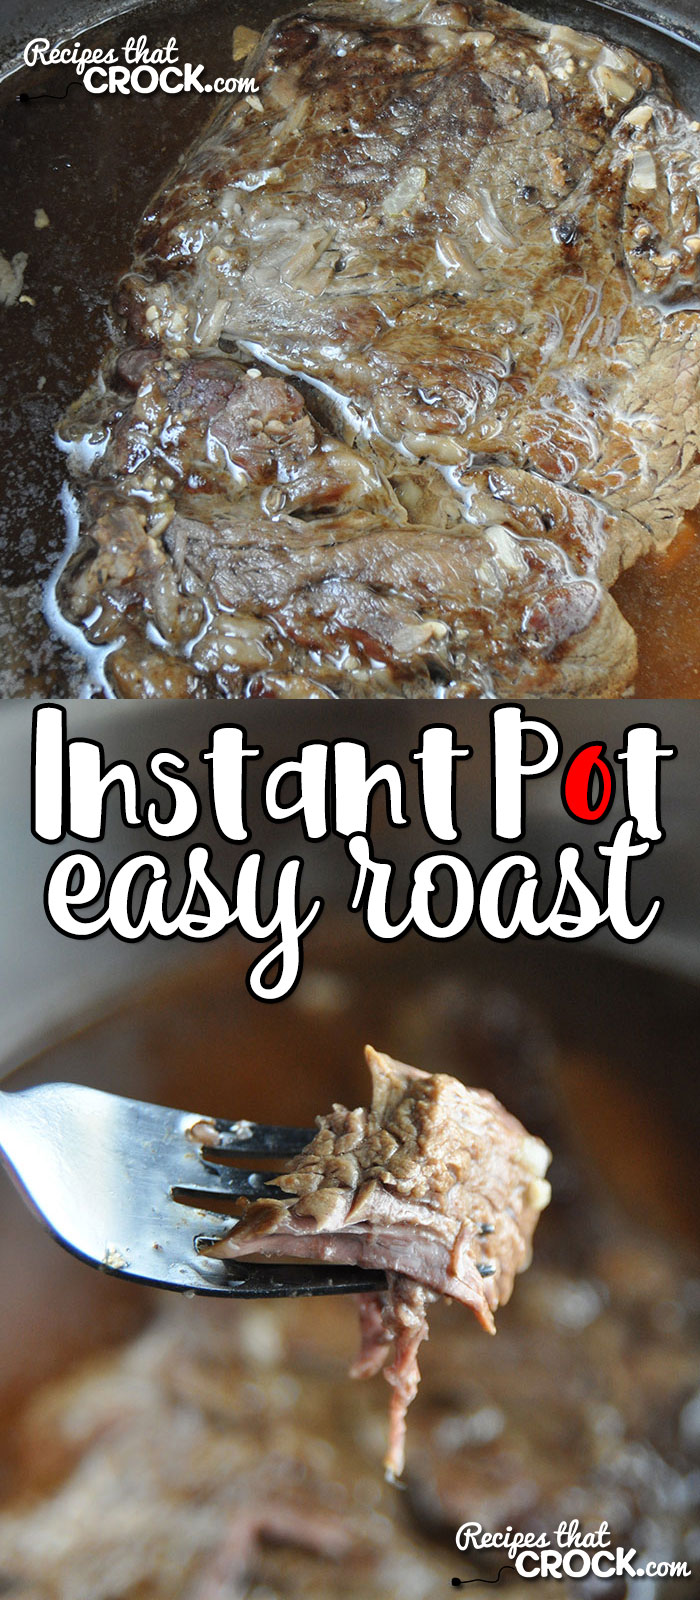 It doesn't get any easier than this Easy Instant Pot Roast. Even better, this roast is fall-apart tender and incredibly delicious!